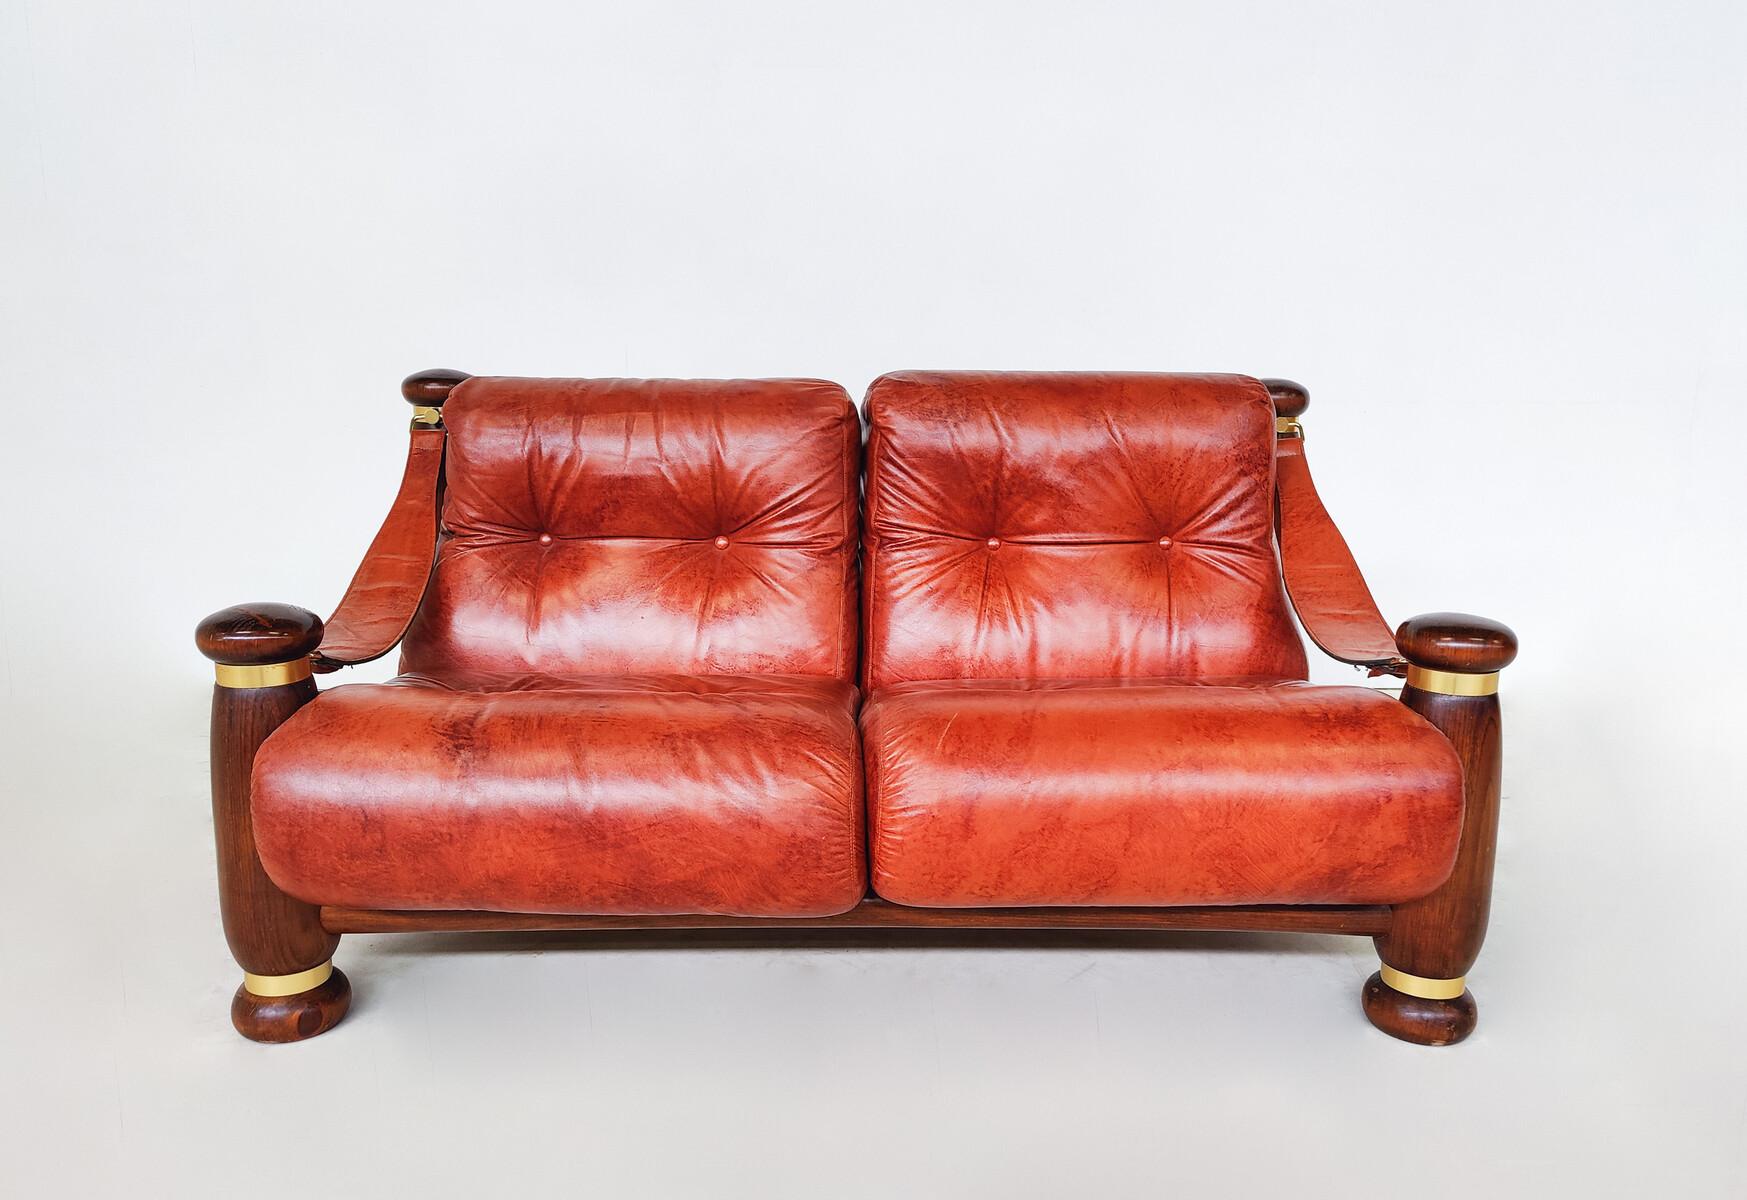 Mid-Century Modern Seating Set, Leather and Wood, Italy, 1970s - Original Leather.